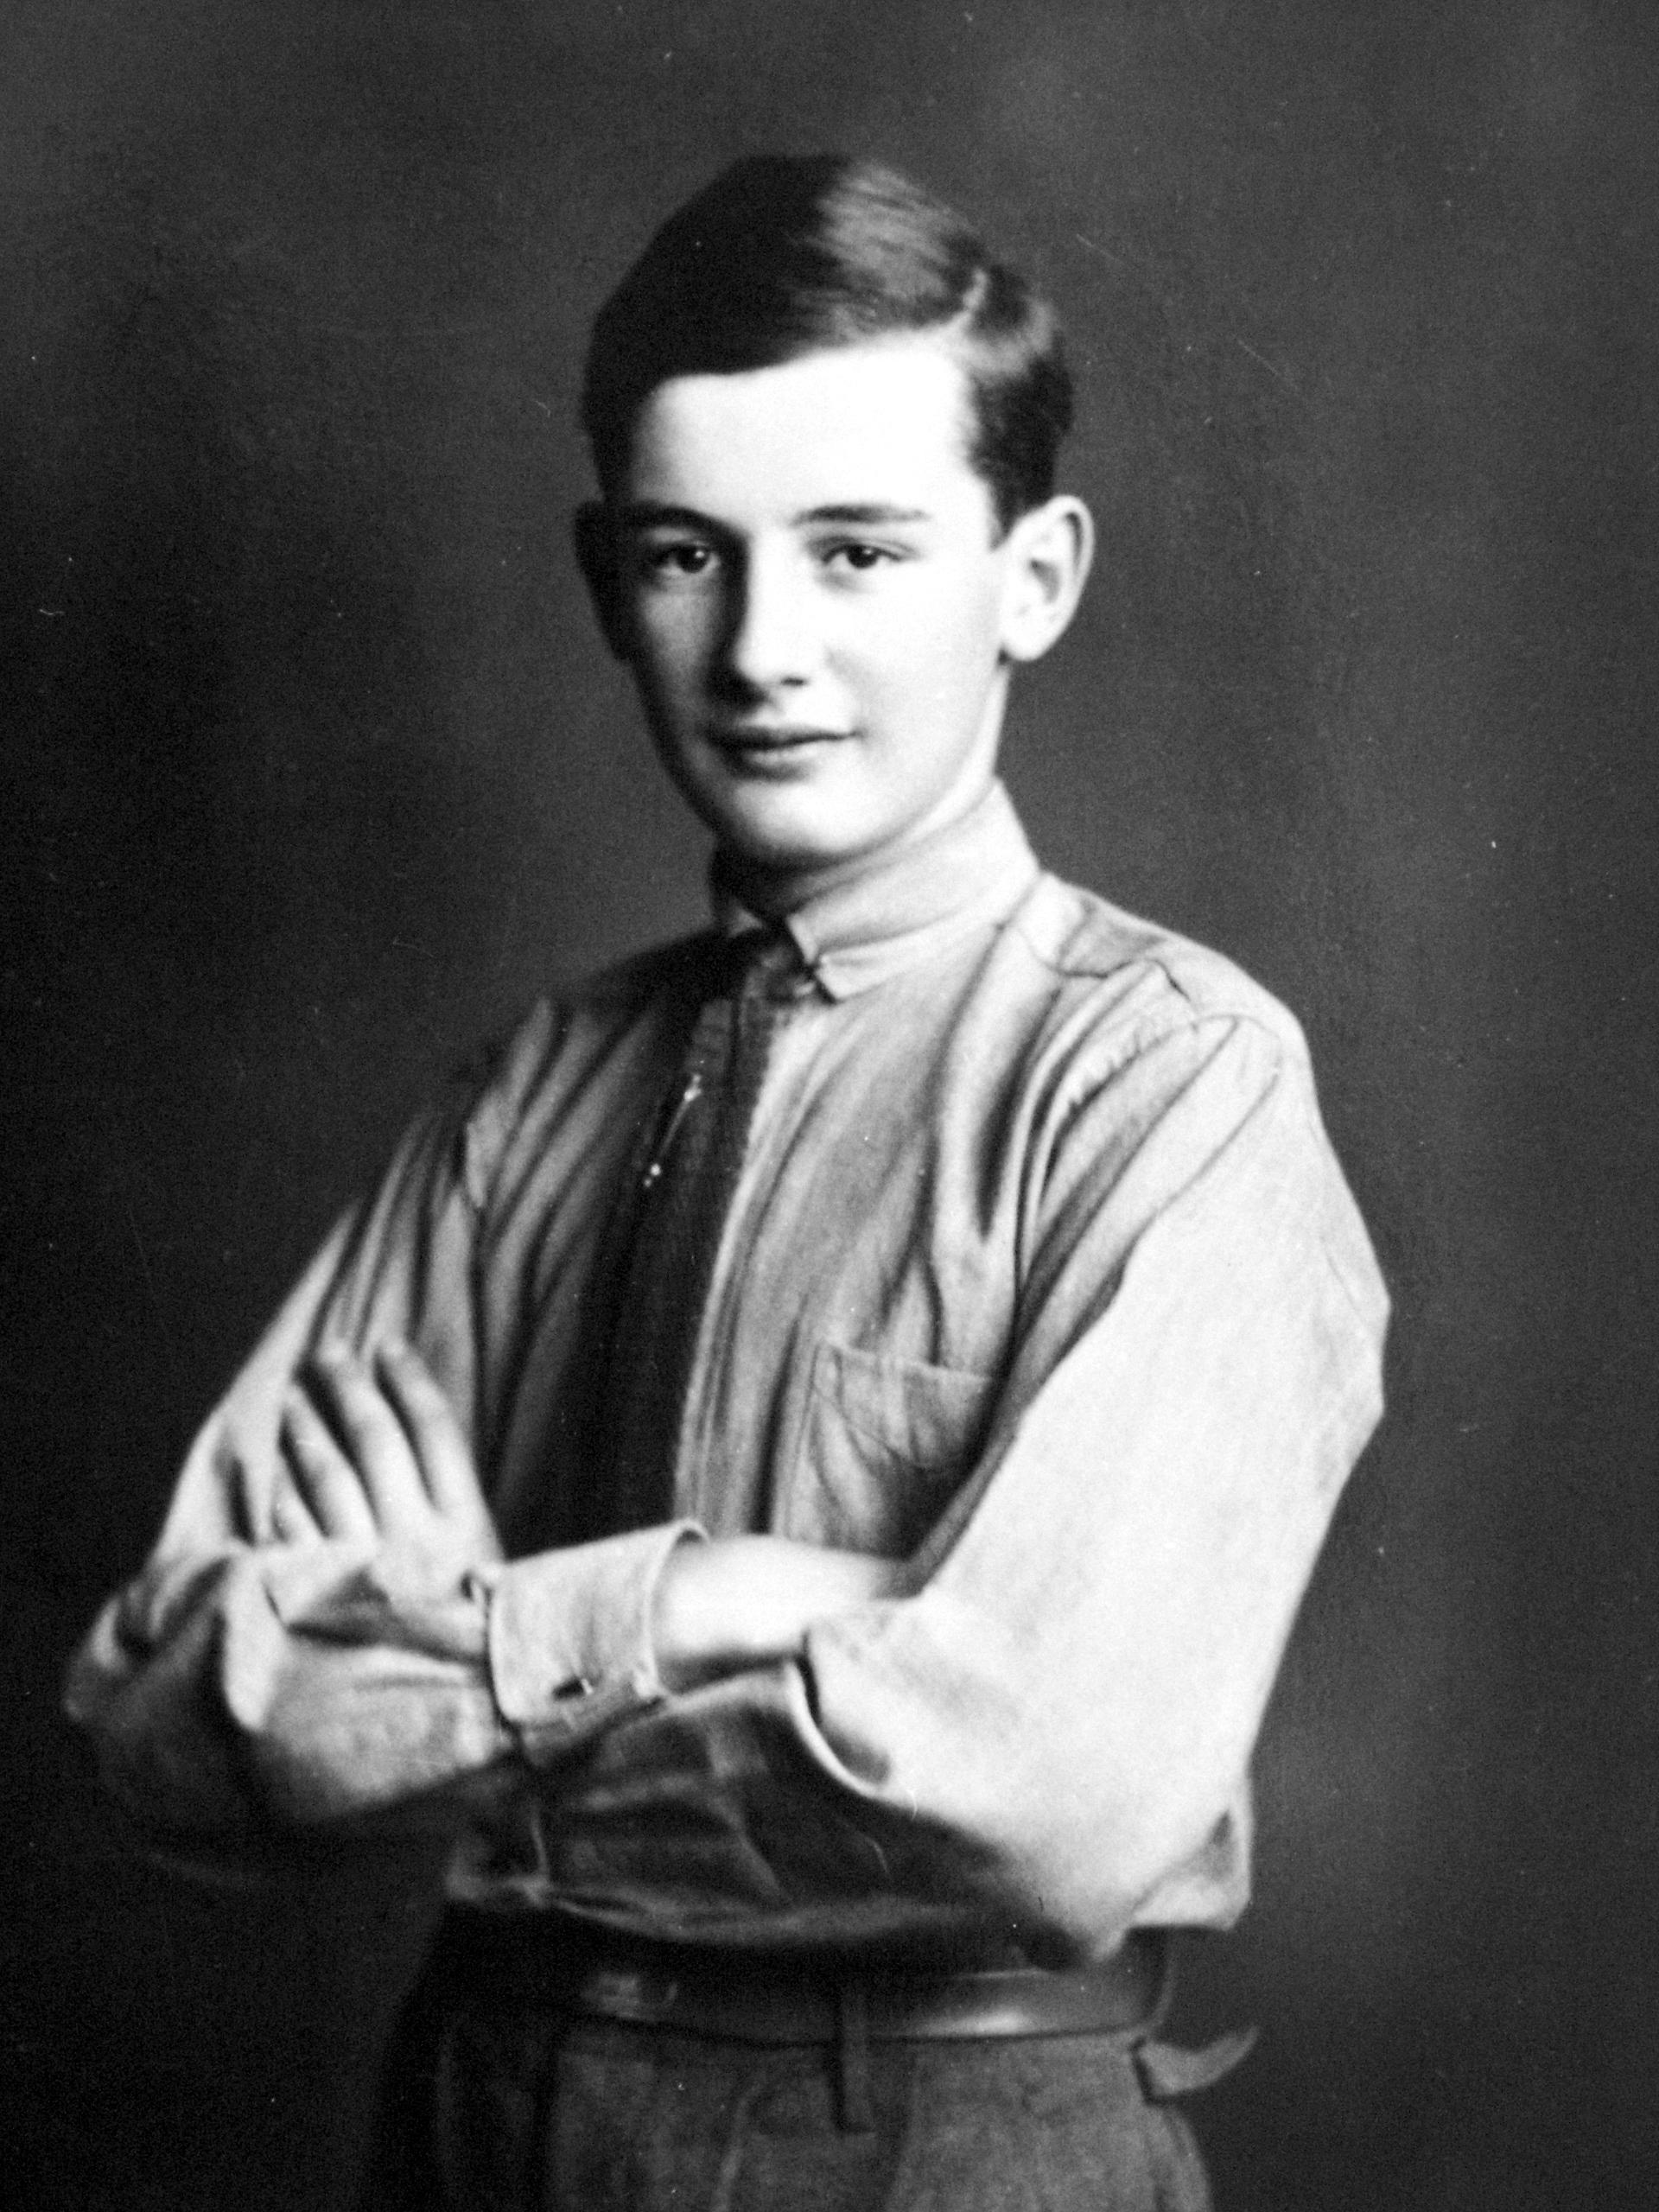 Black-and-white photo of Raoul Wallenberg as a young man, dressed in shirt and tie.